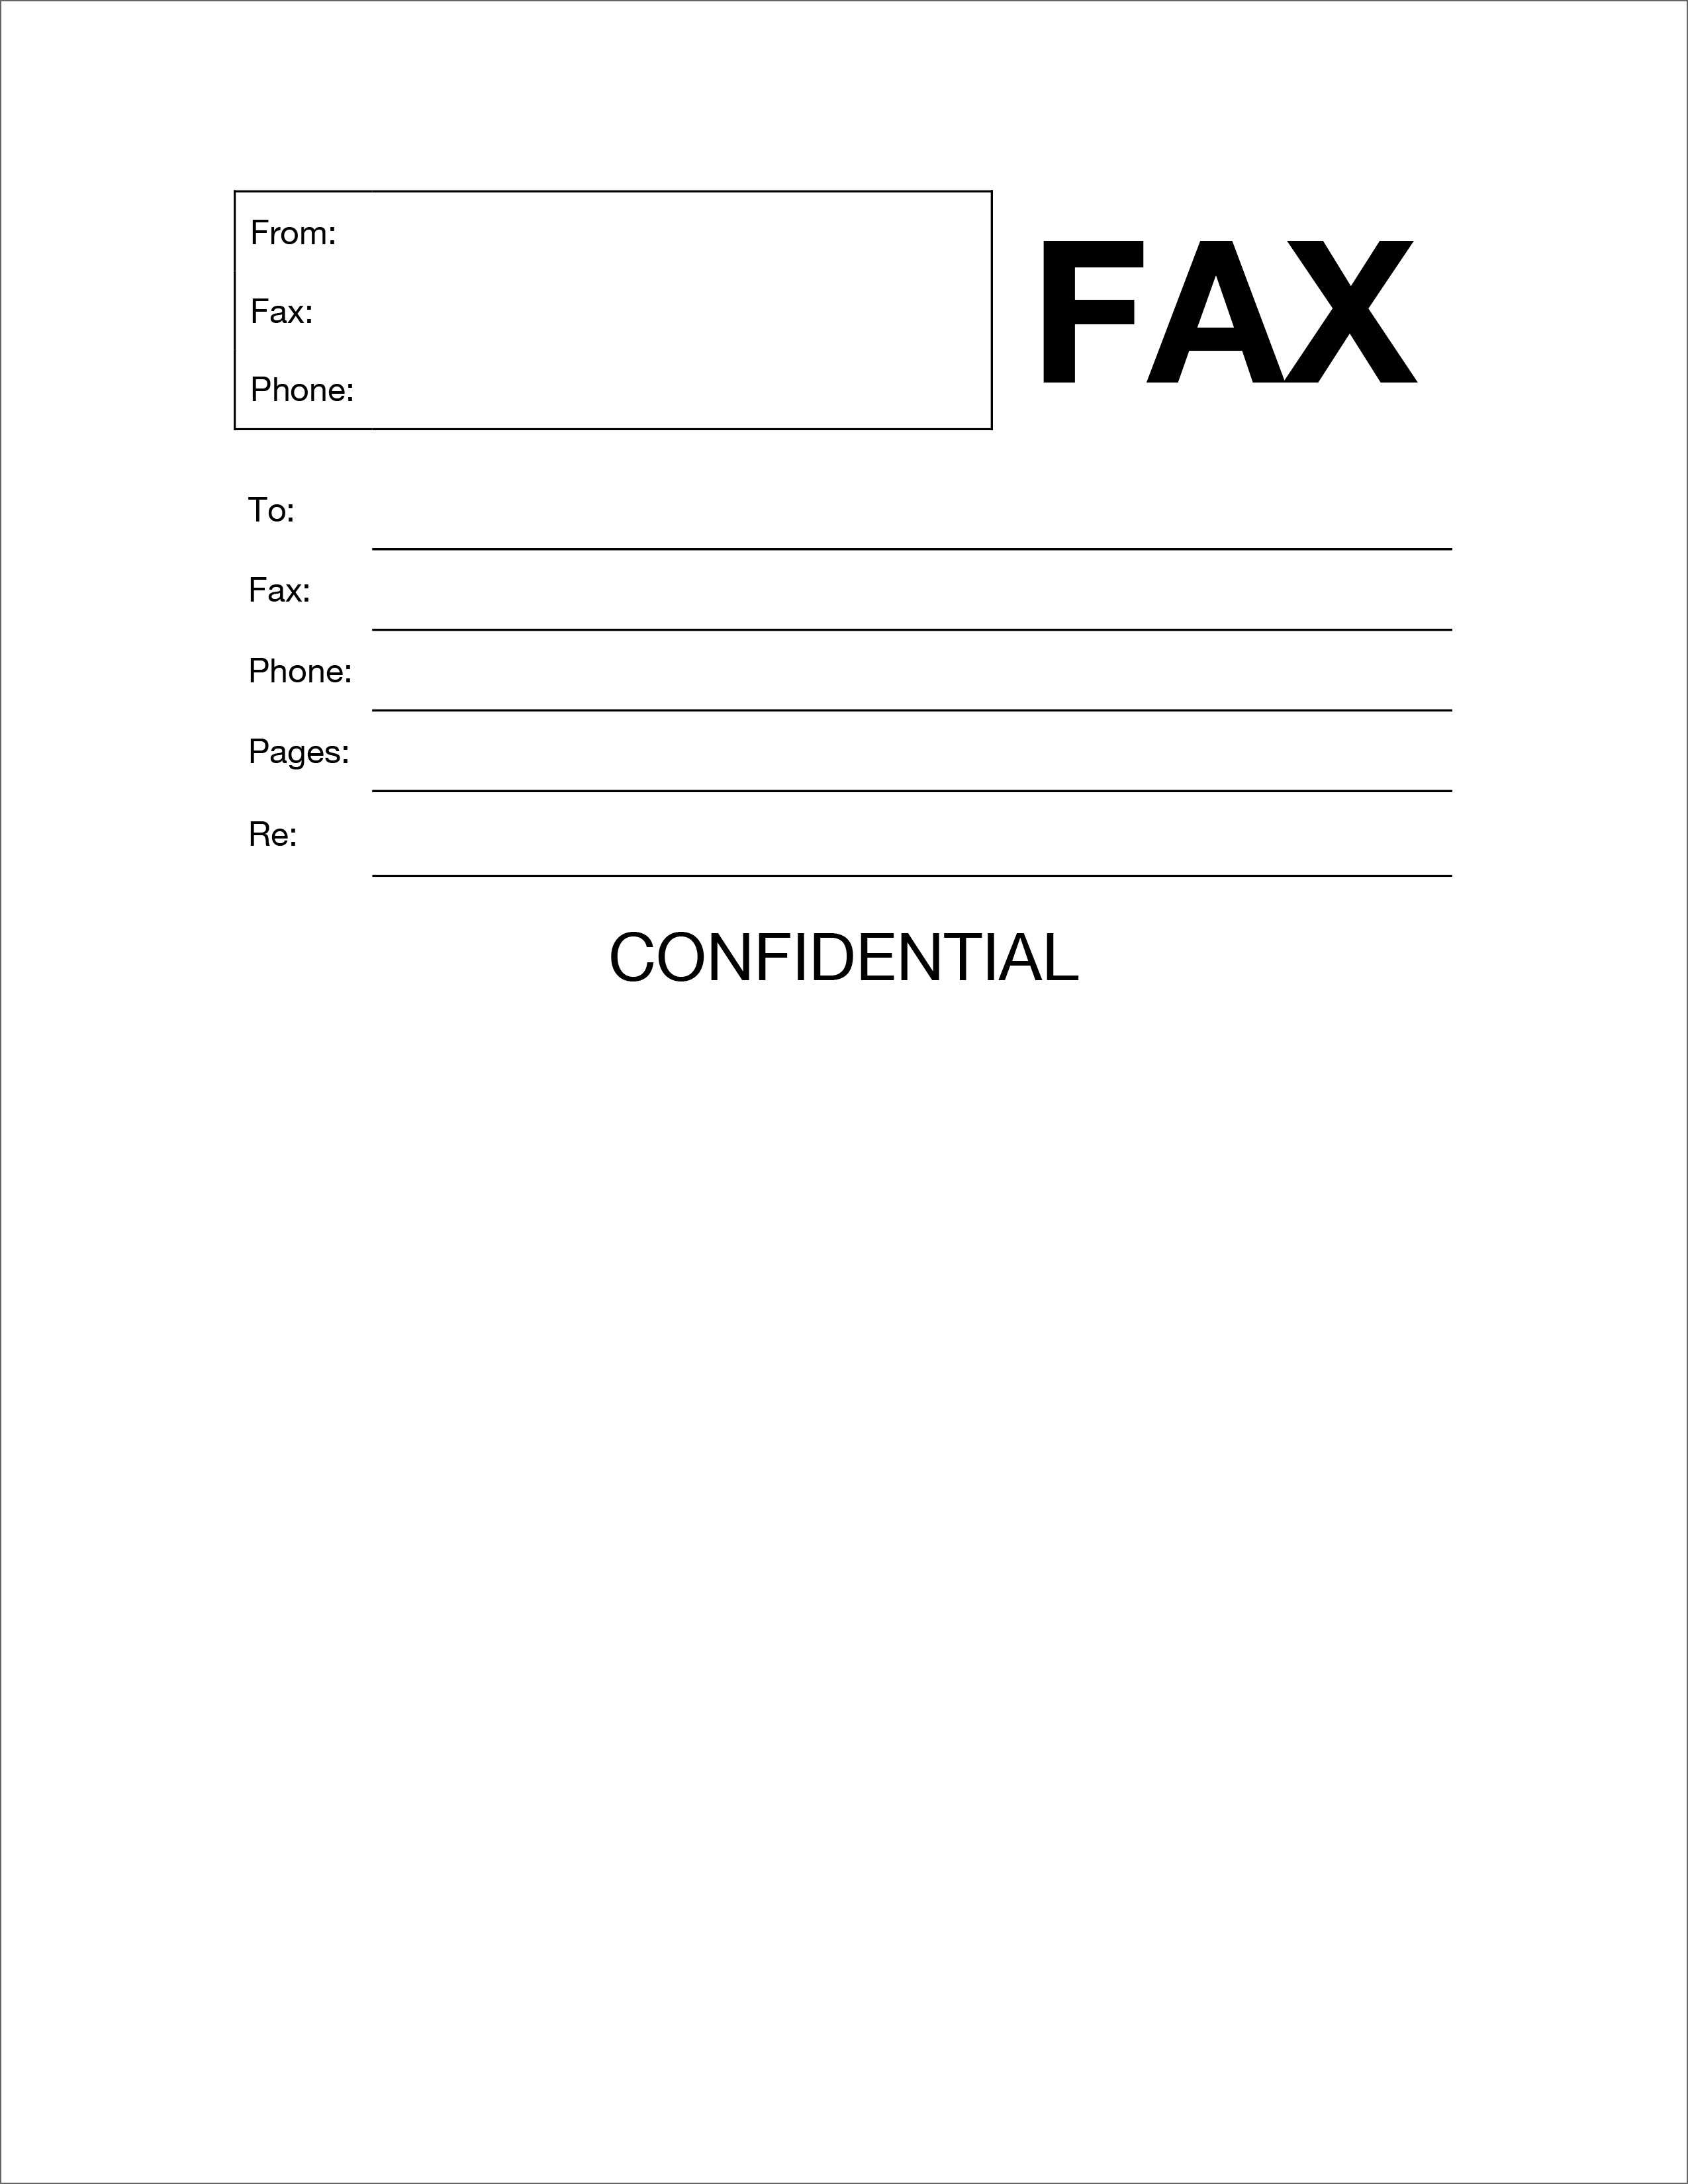 005 Fax Cover Template Ideas Exceptional Letter Simple Sheet Intended For Fax Template Word 2010